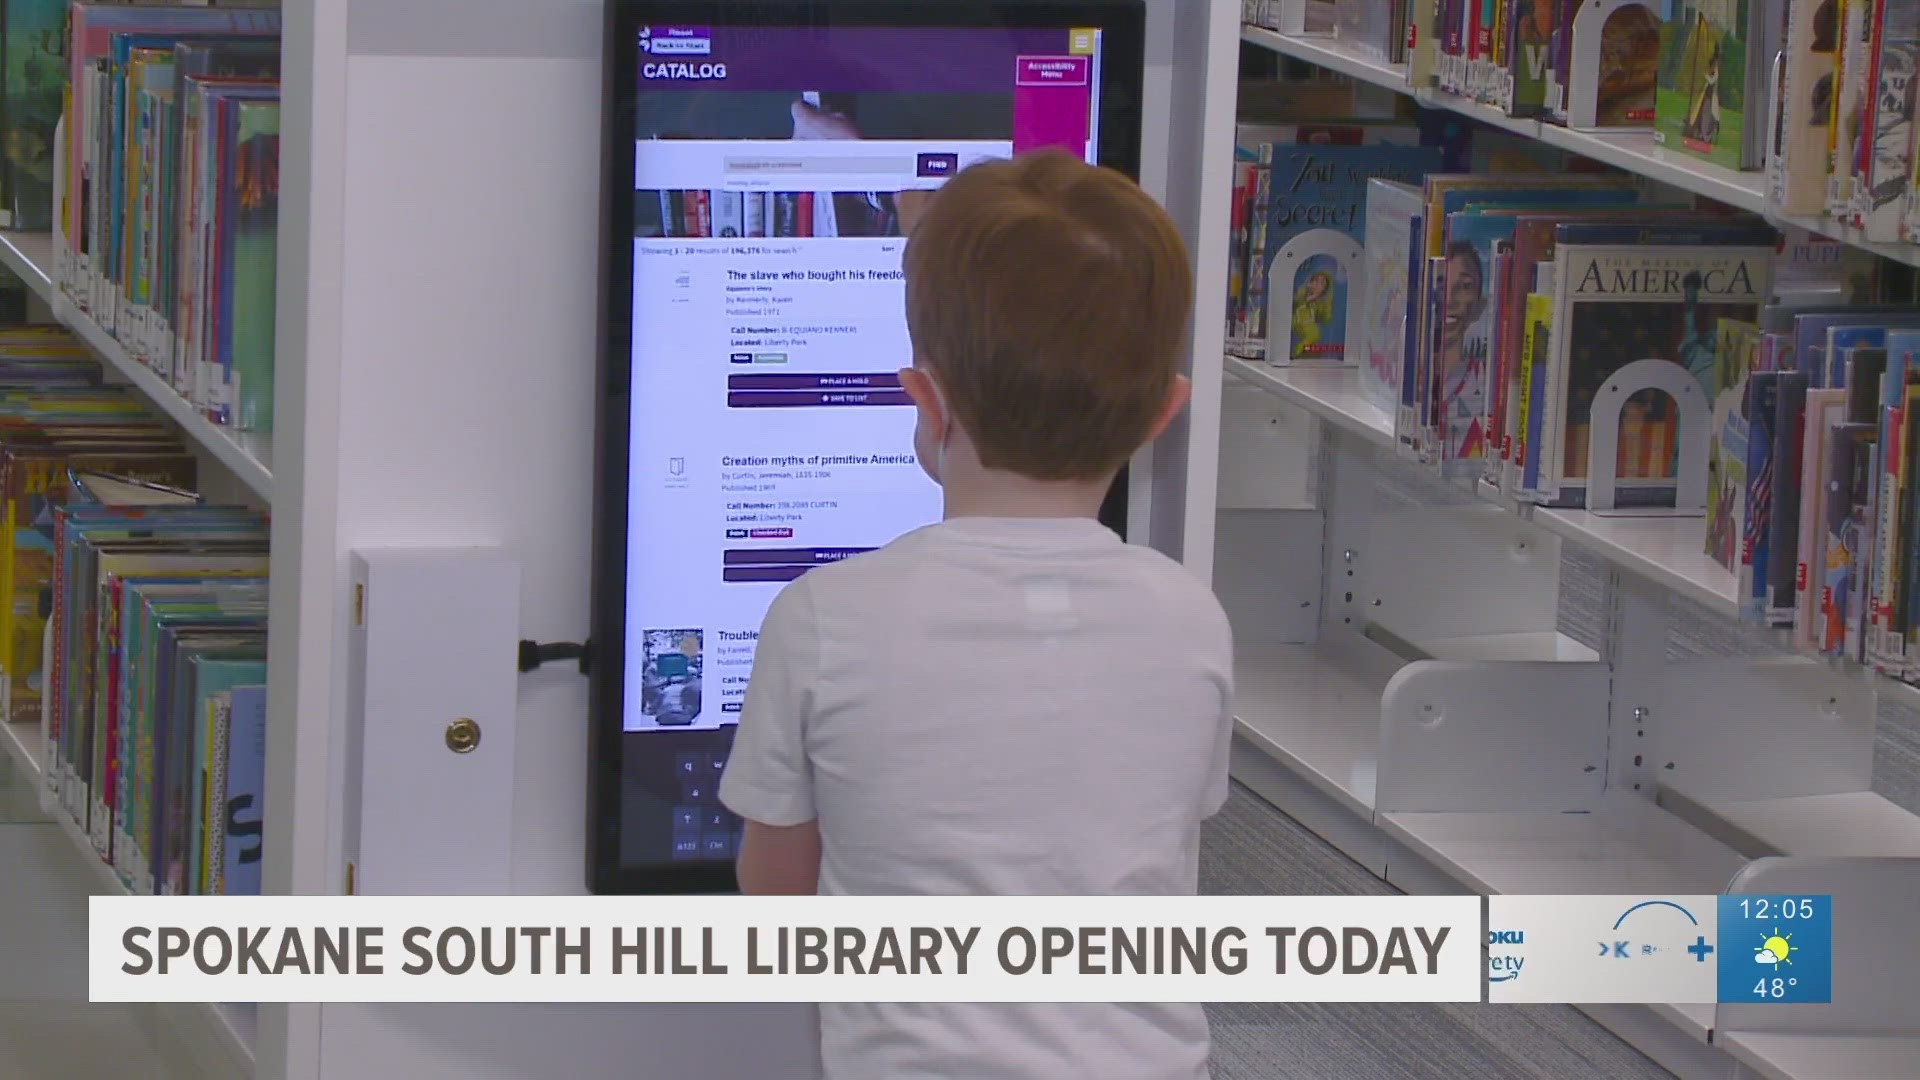 The South Hill Library was closed for renovations as part of a $77 million bond that was passed back in 2018. It is the last library to finish renovations.